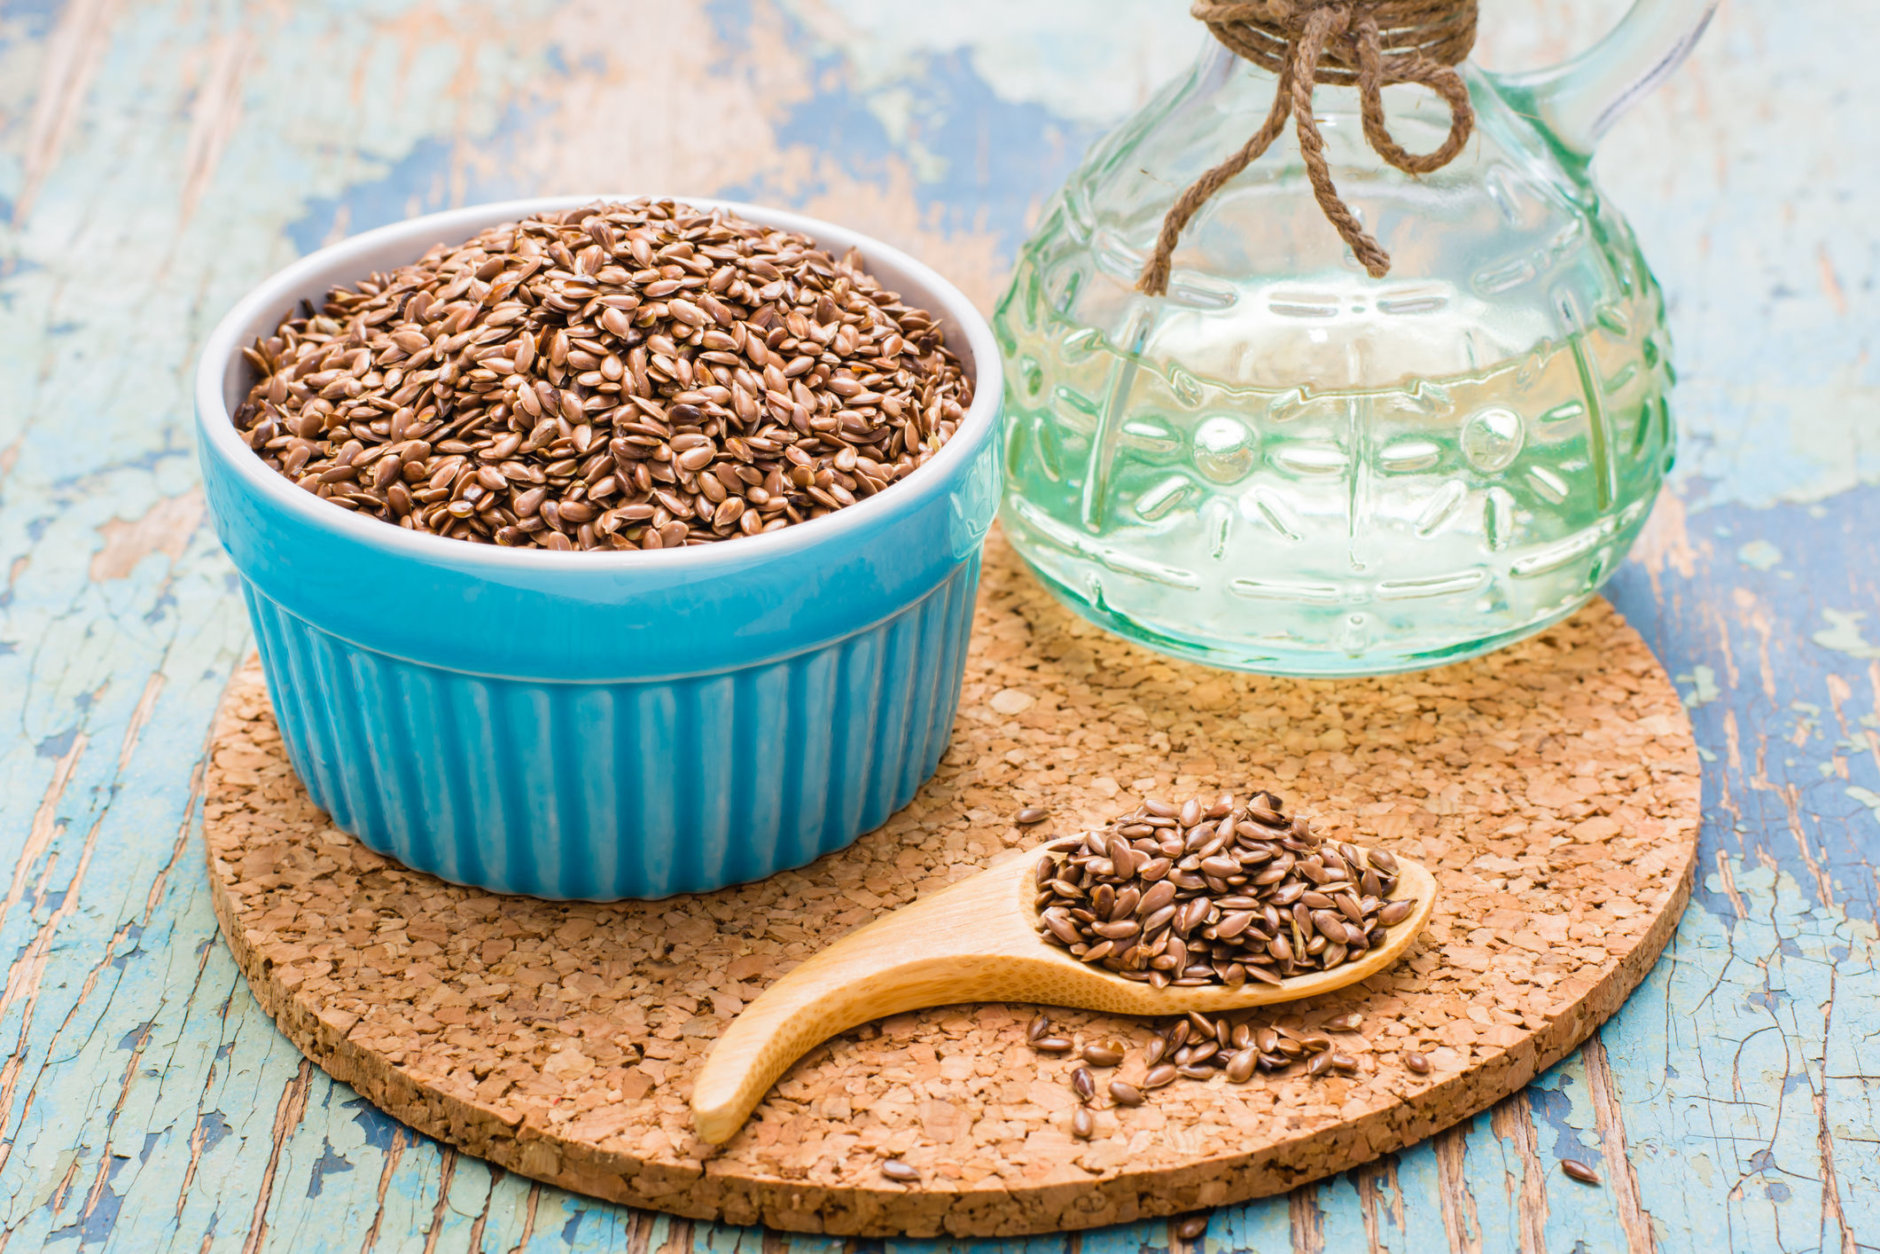 Flax seeds in a spoon and a bowl, linseed oil in a bottle on a wooden table